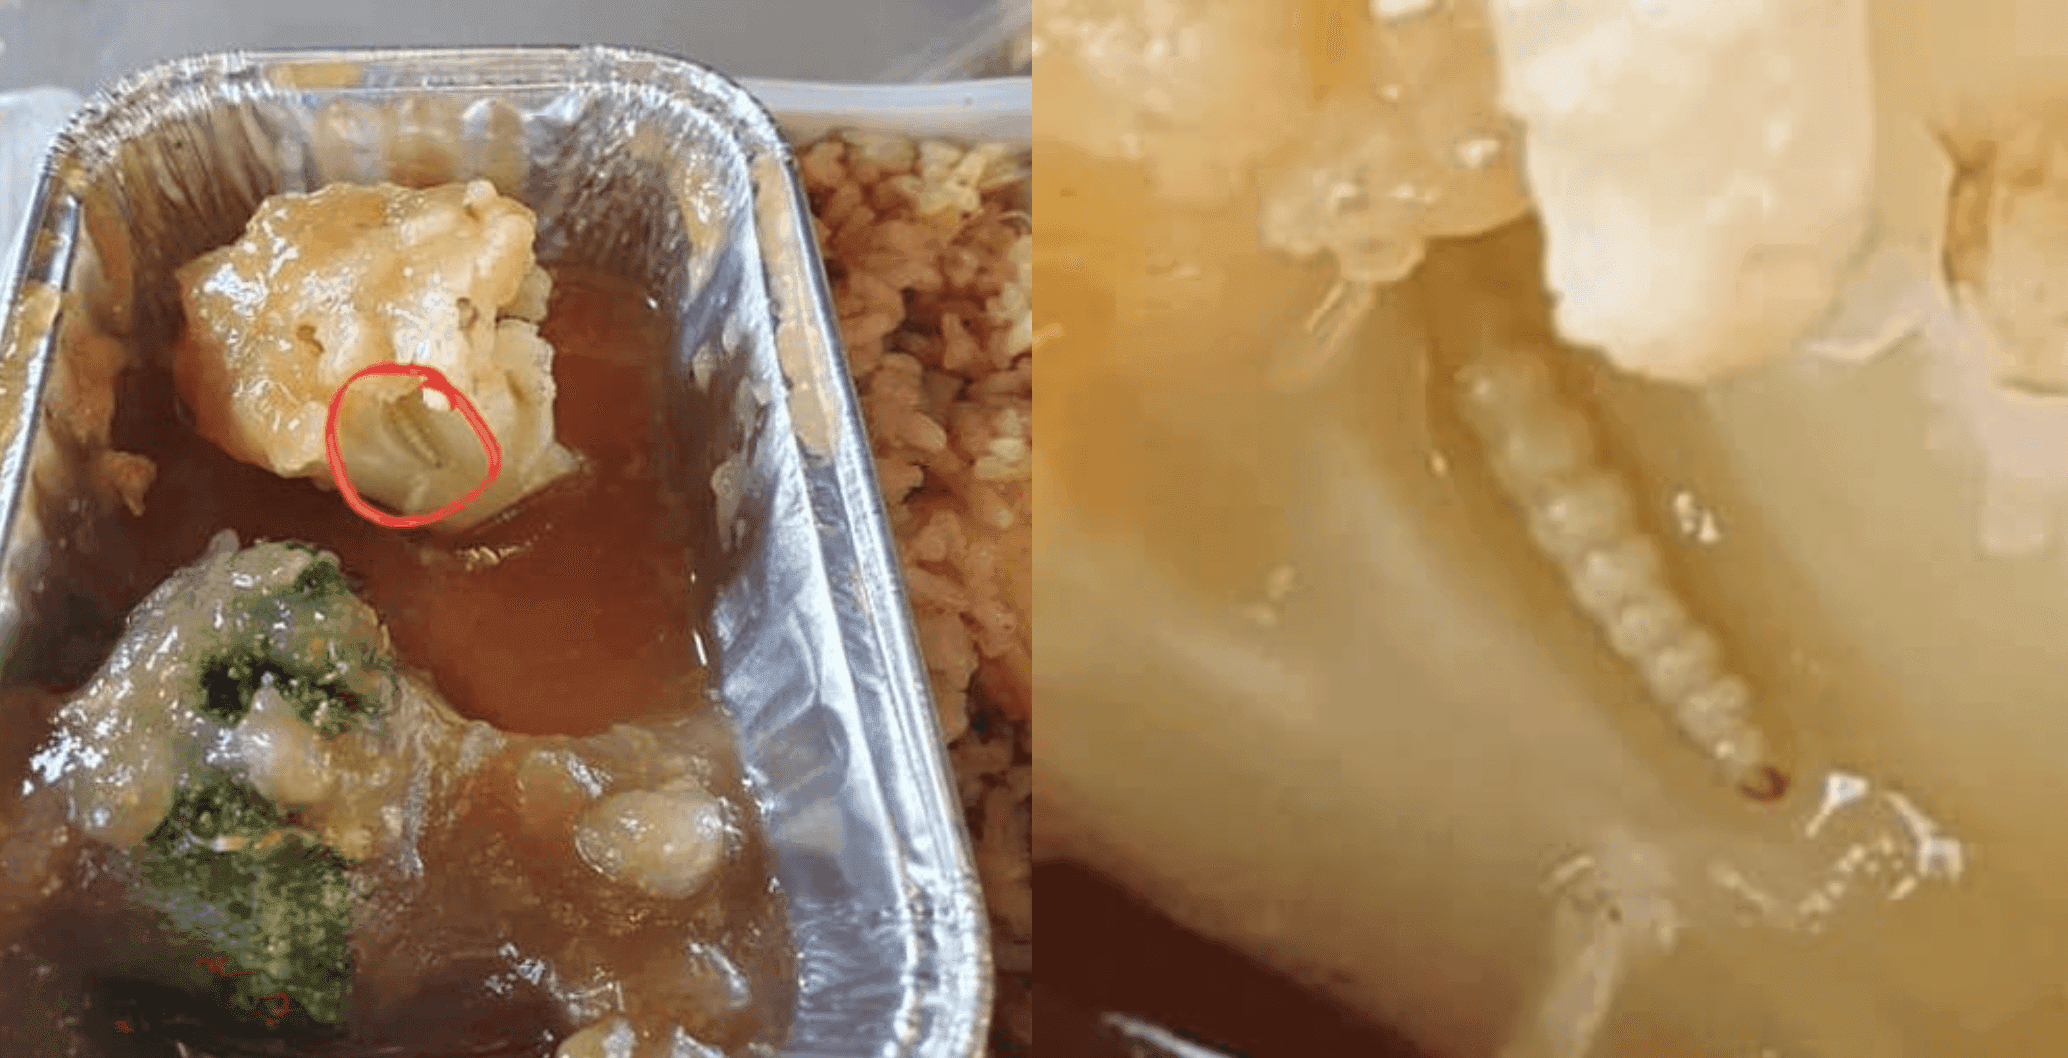 Pictures of a maggot found in a meal served on an AirAsia flight in December, shared online by Jagruti Upadhaya.
